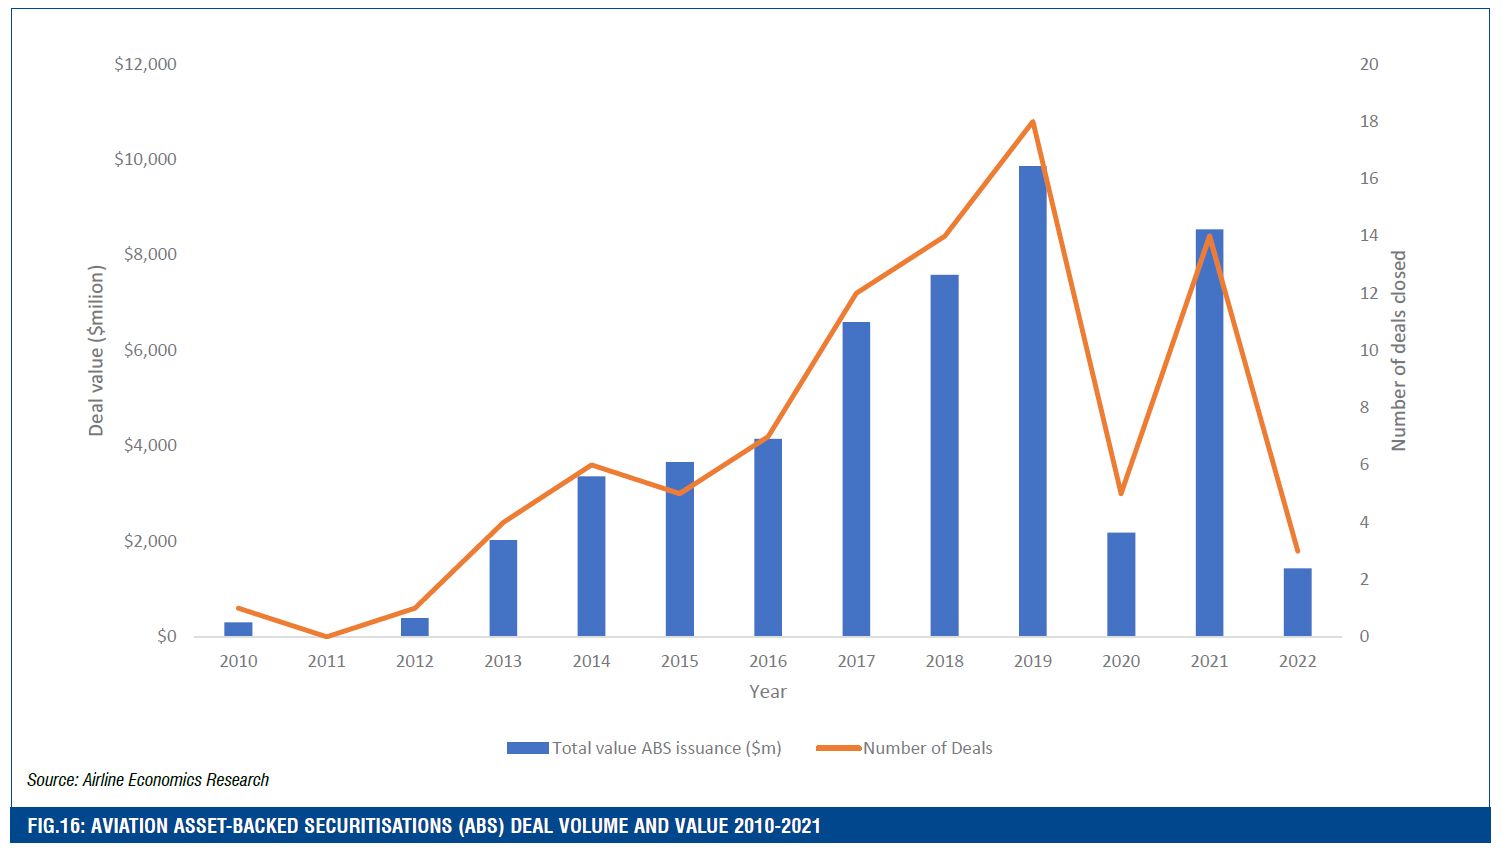 FIG.16: AVIATION ASSET-BACKED SECURITISATIONS (ABS) DEAL VOLUME AND VALUE 2010-2021